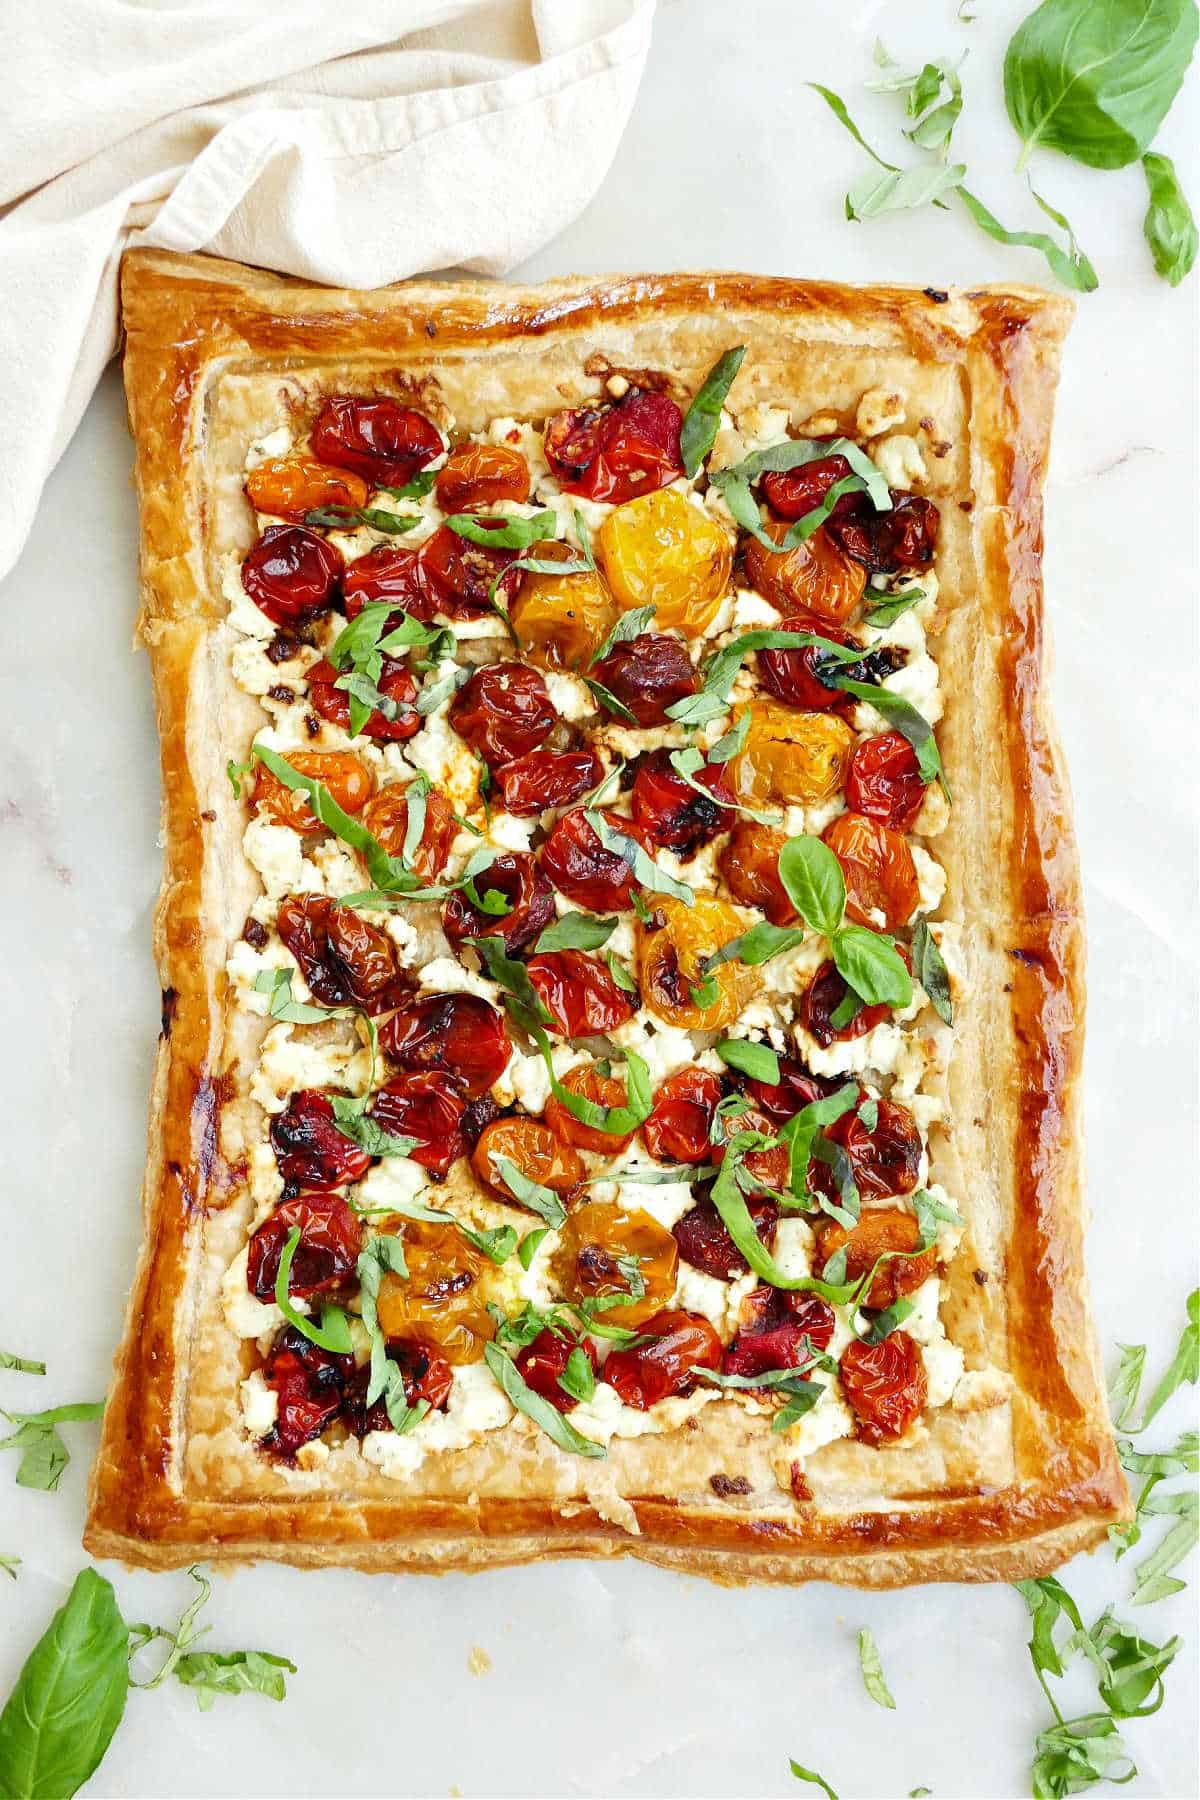 roasted cherry tomato tart on a counter next to basil leaves and a napkin